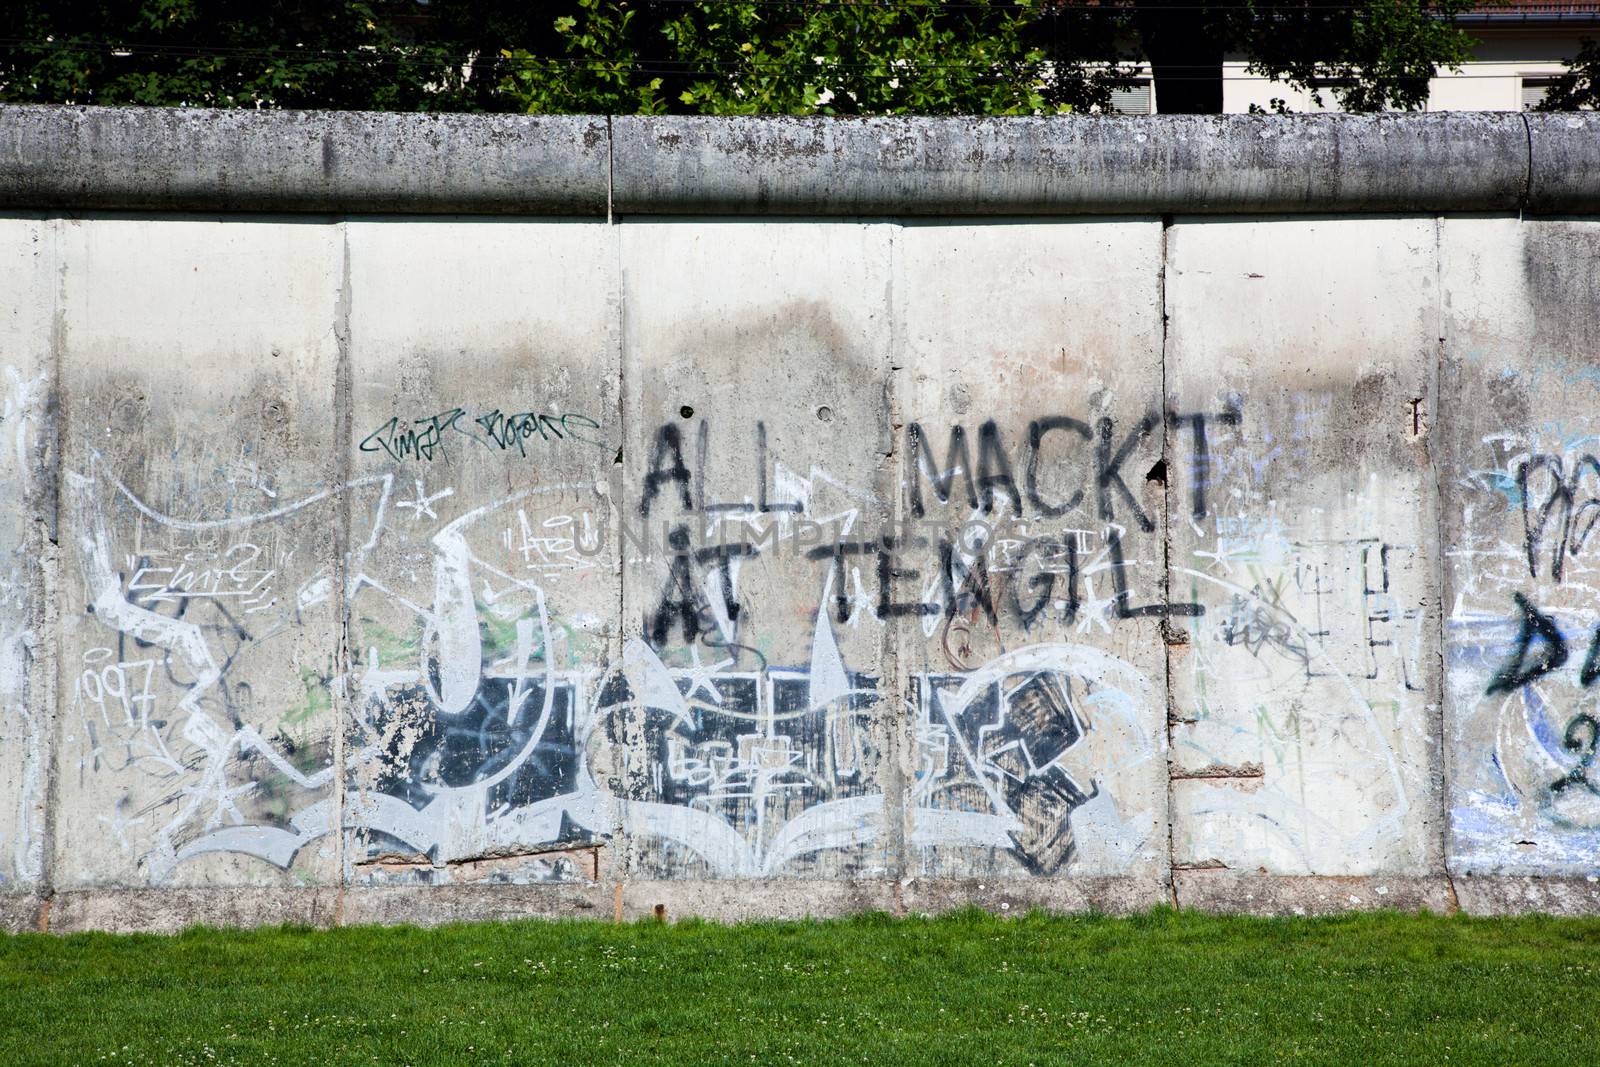 Berlin Wall Memorial with graffiti front view, good for background. The Gedenkstatte Berliner Mauer 